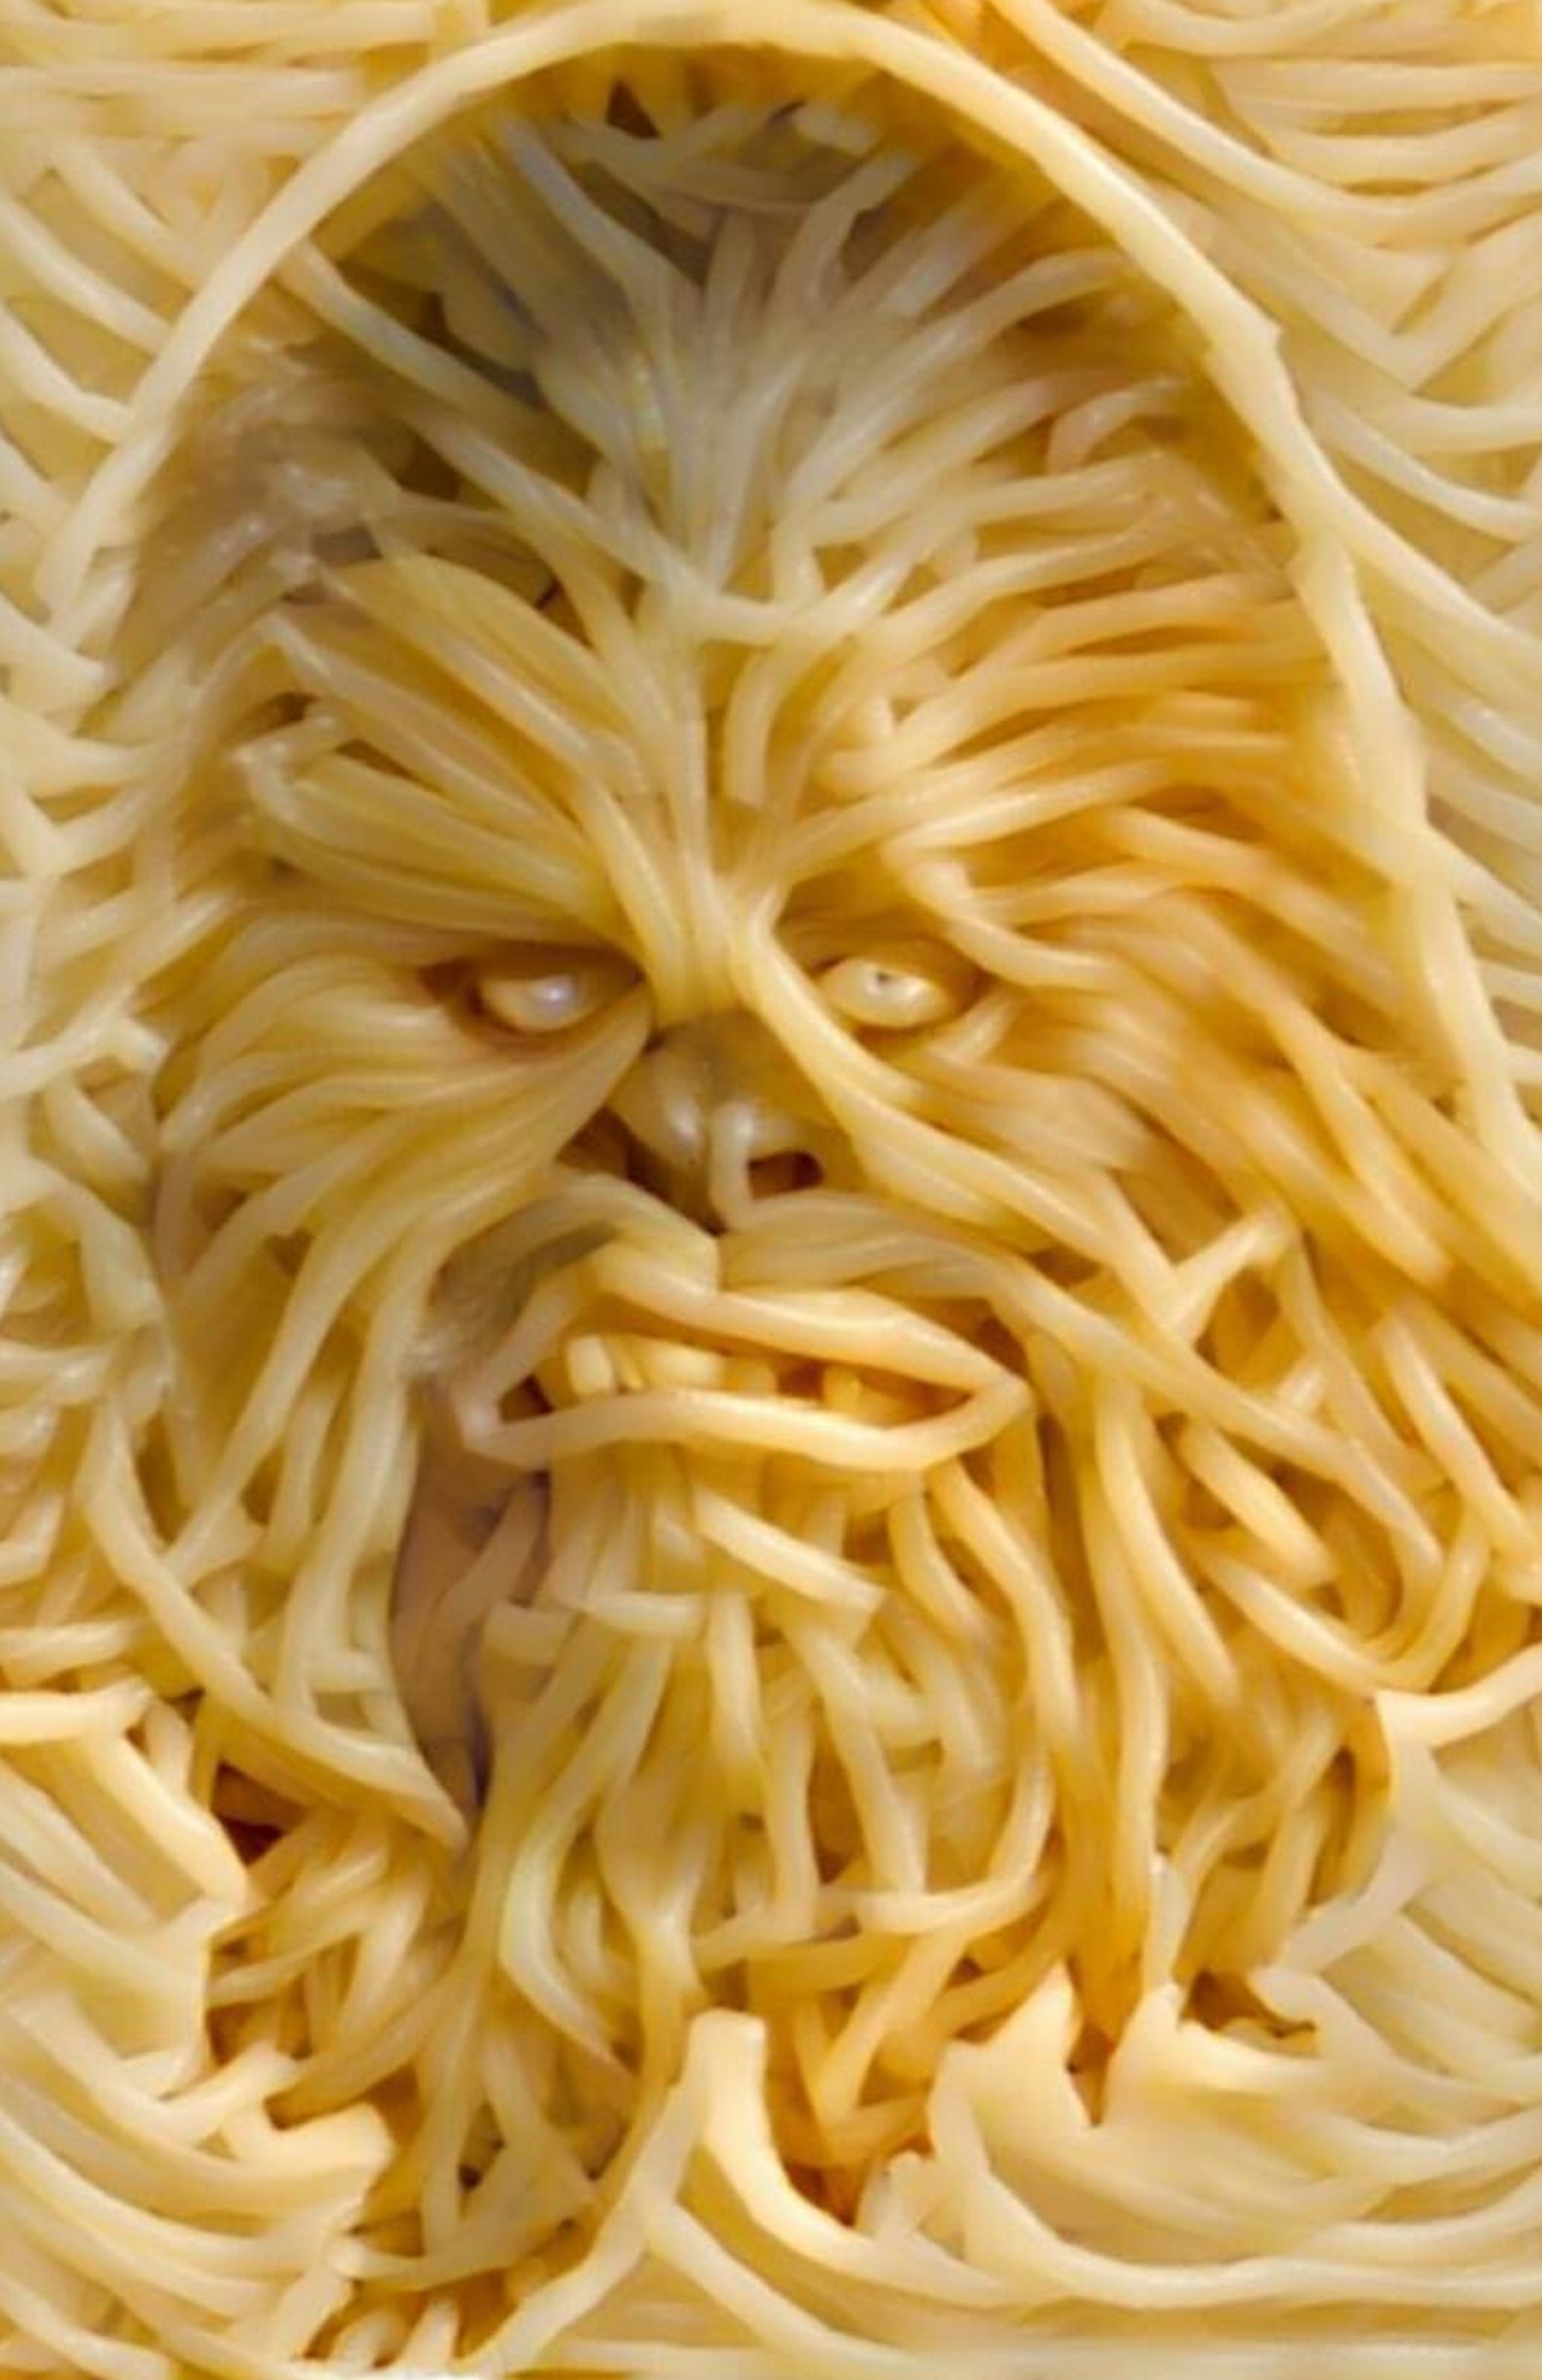 This might look like Chewbacca, but it's an impasta.